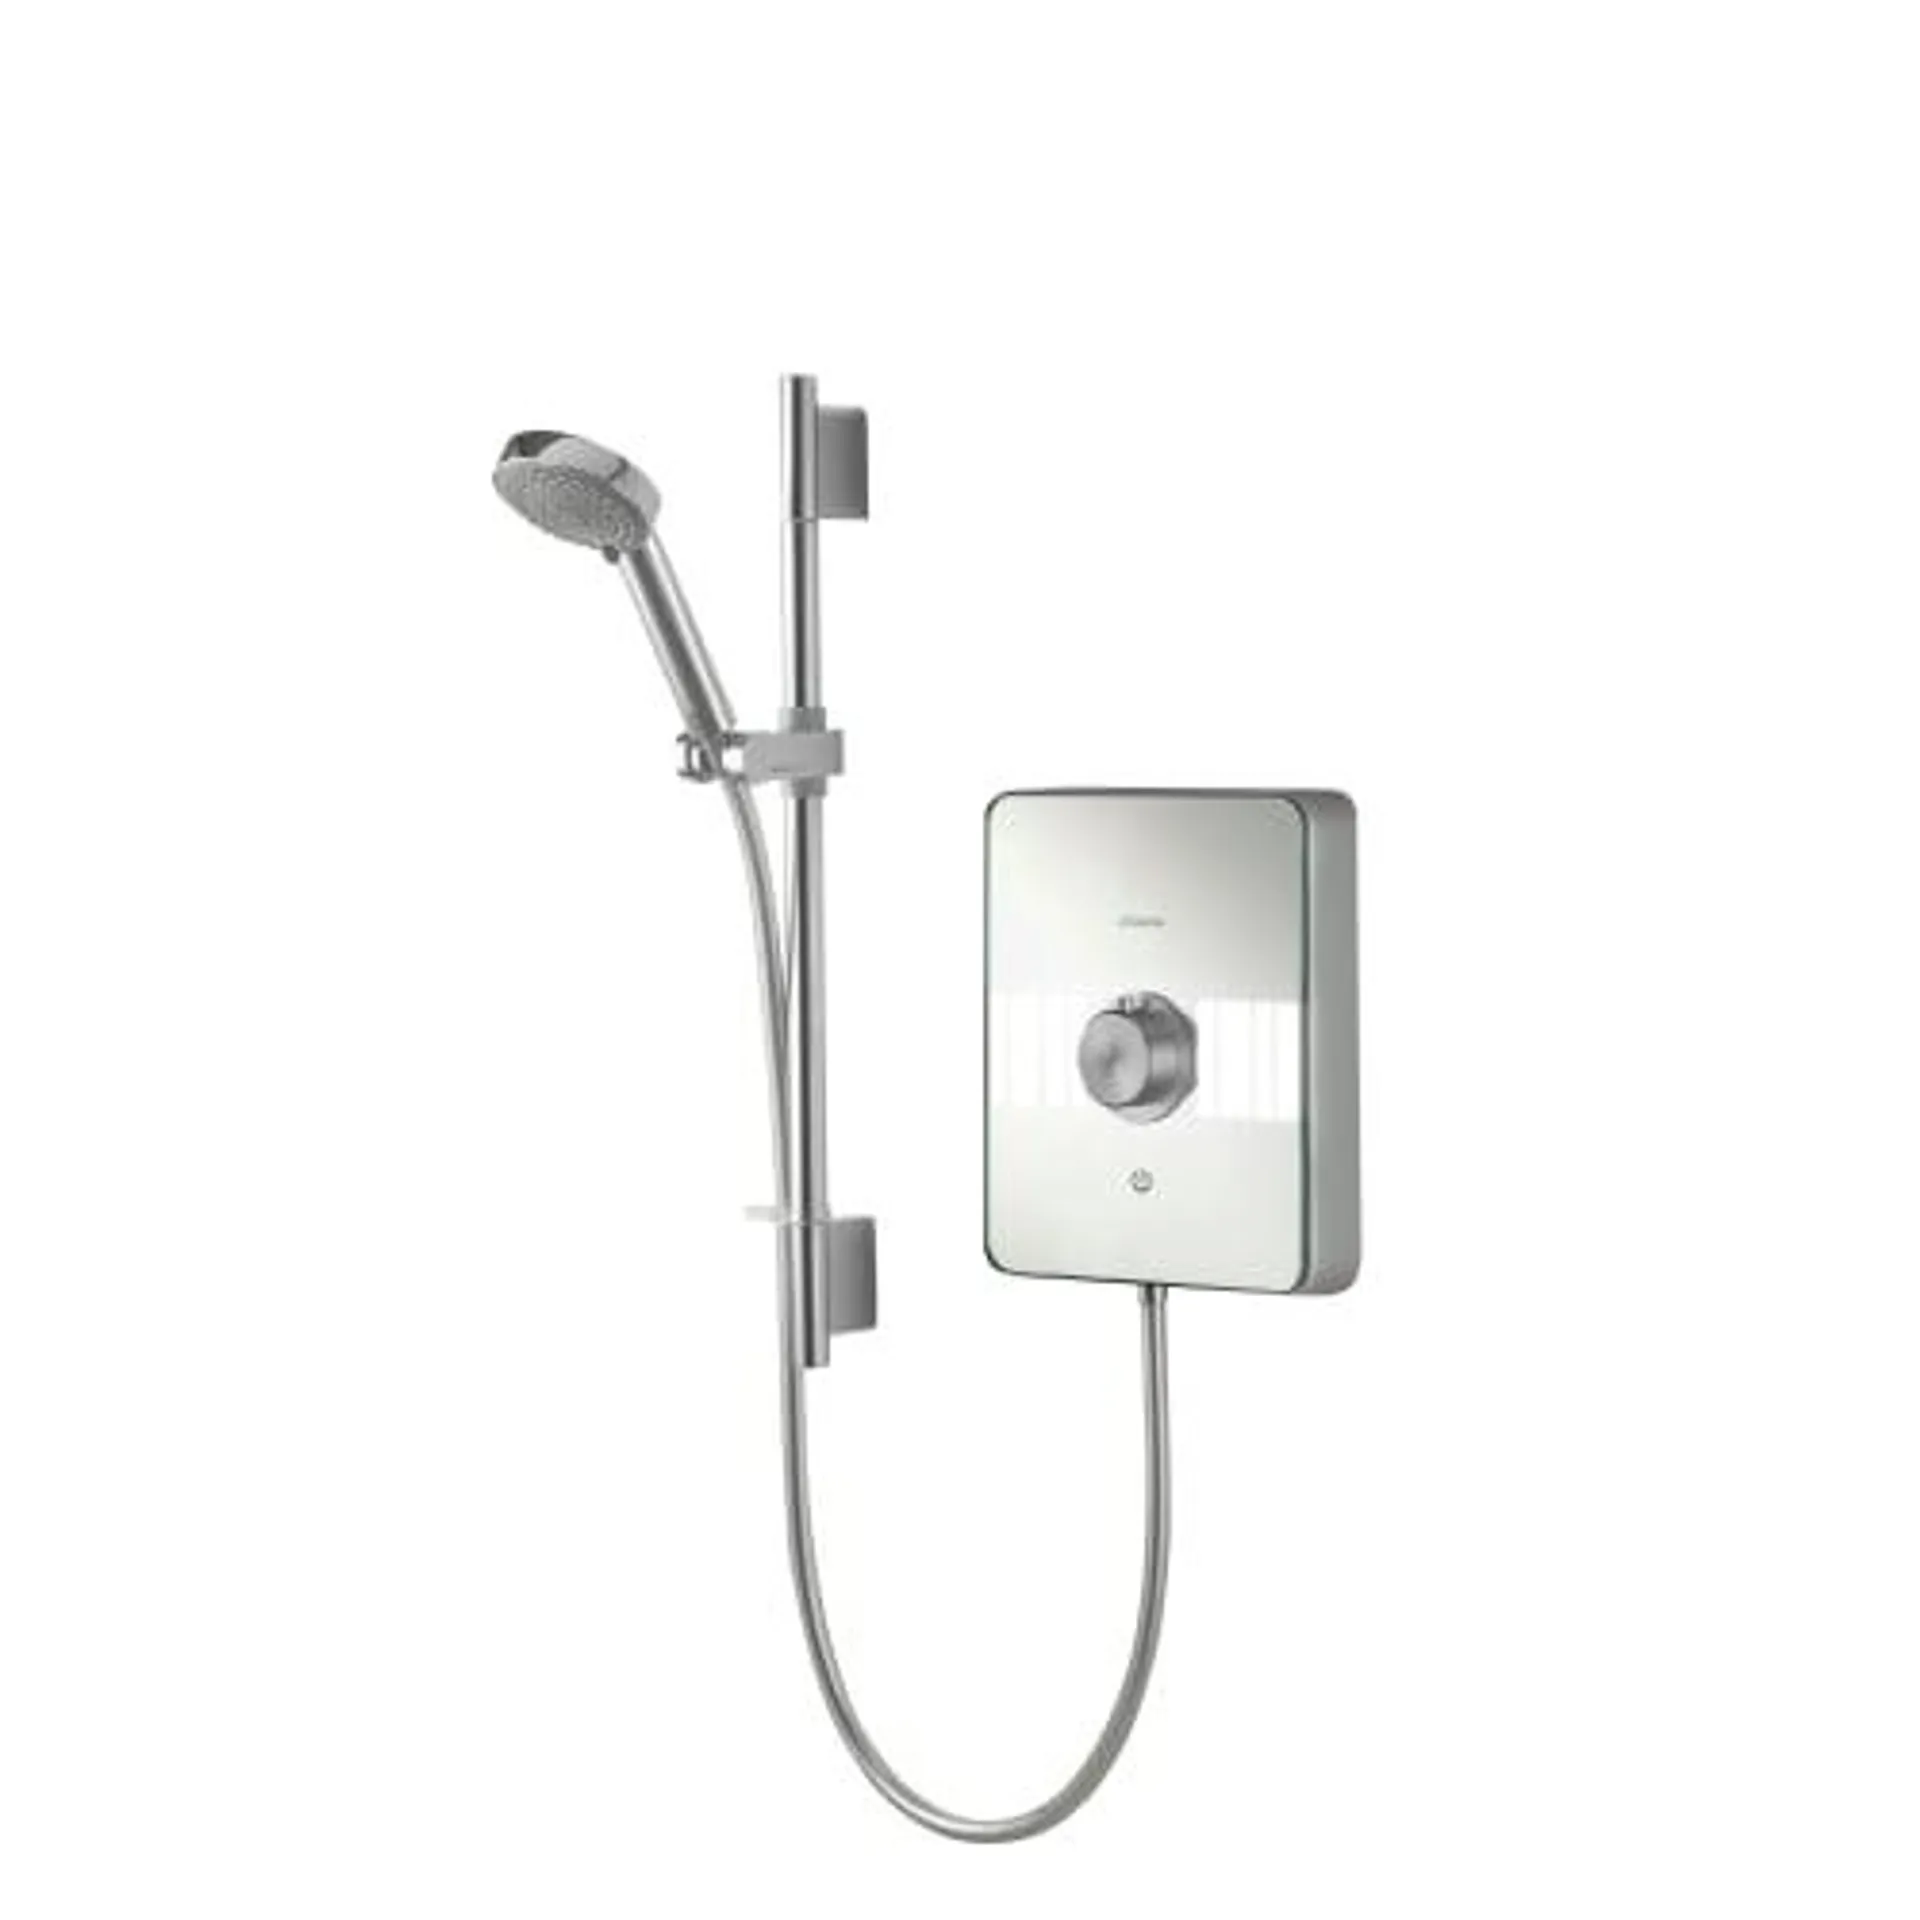 Aqualisa Lumi Electric 9.5kw Electric Shower with Adjustable Head – Chrome